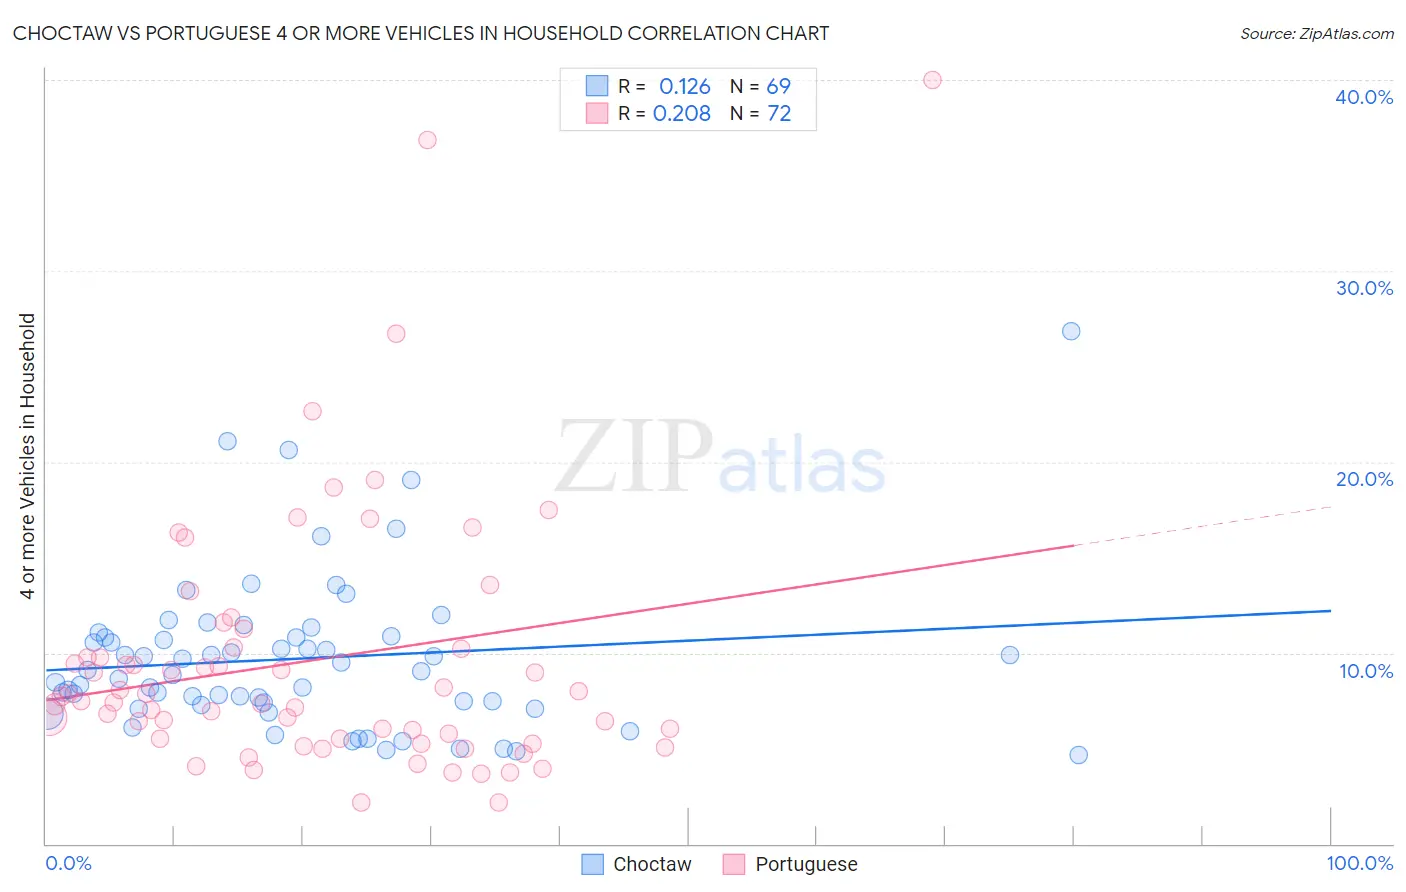 Choctaw vs Portuguese 4 or more Vehicles in Household